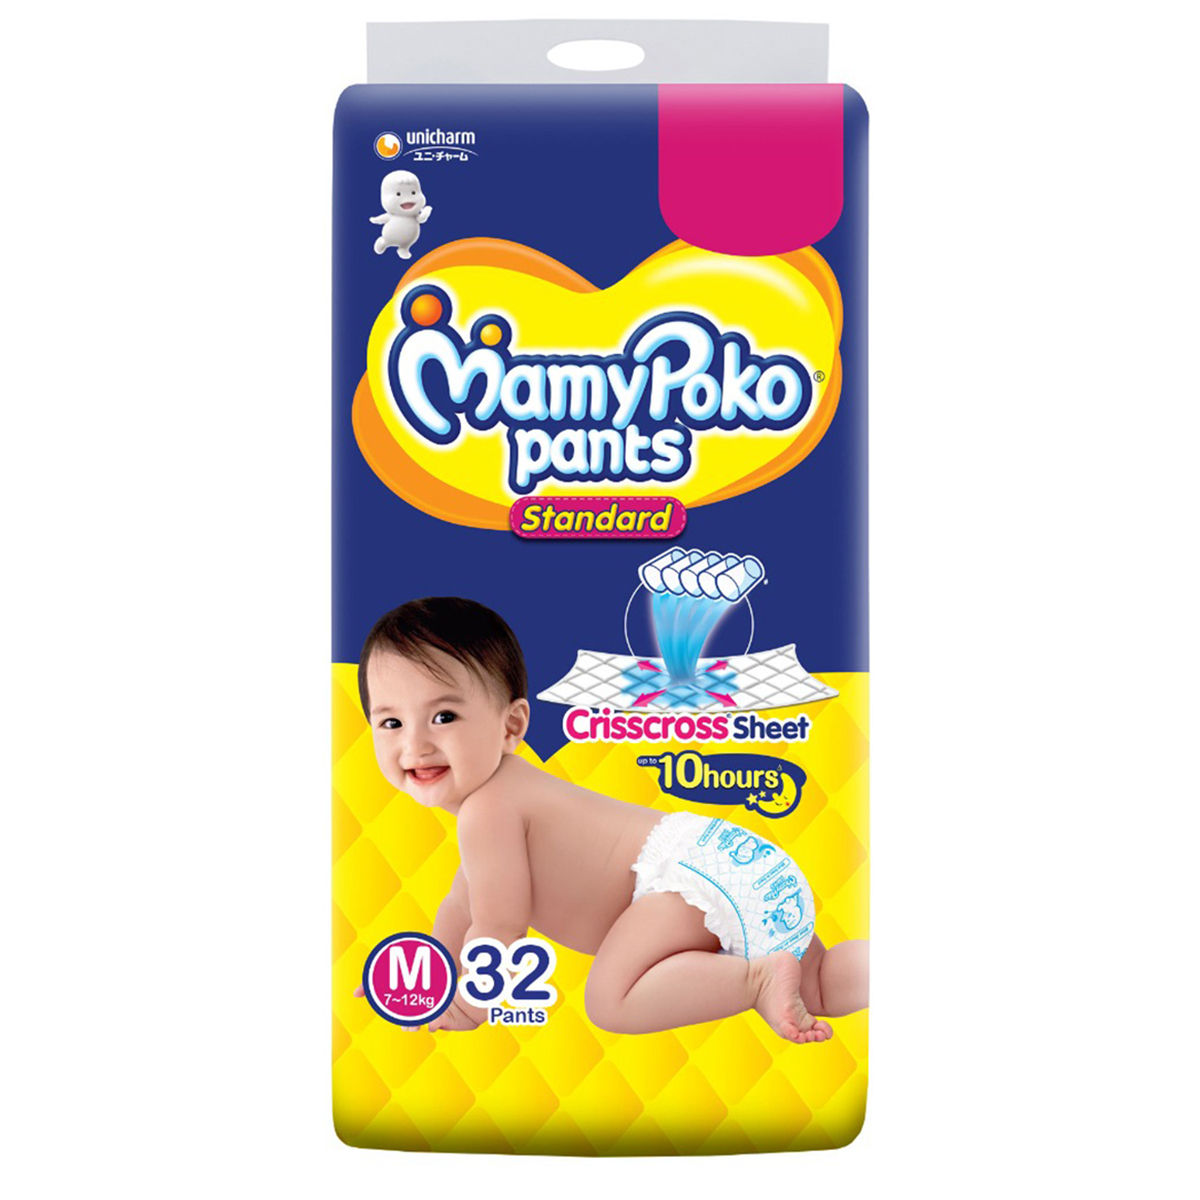 Buy Mamypoko Pants Baby Diaper, 18 Count,Nb-1 18/20S Online at Low Prices  in India - Amazon.in